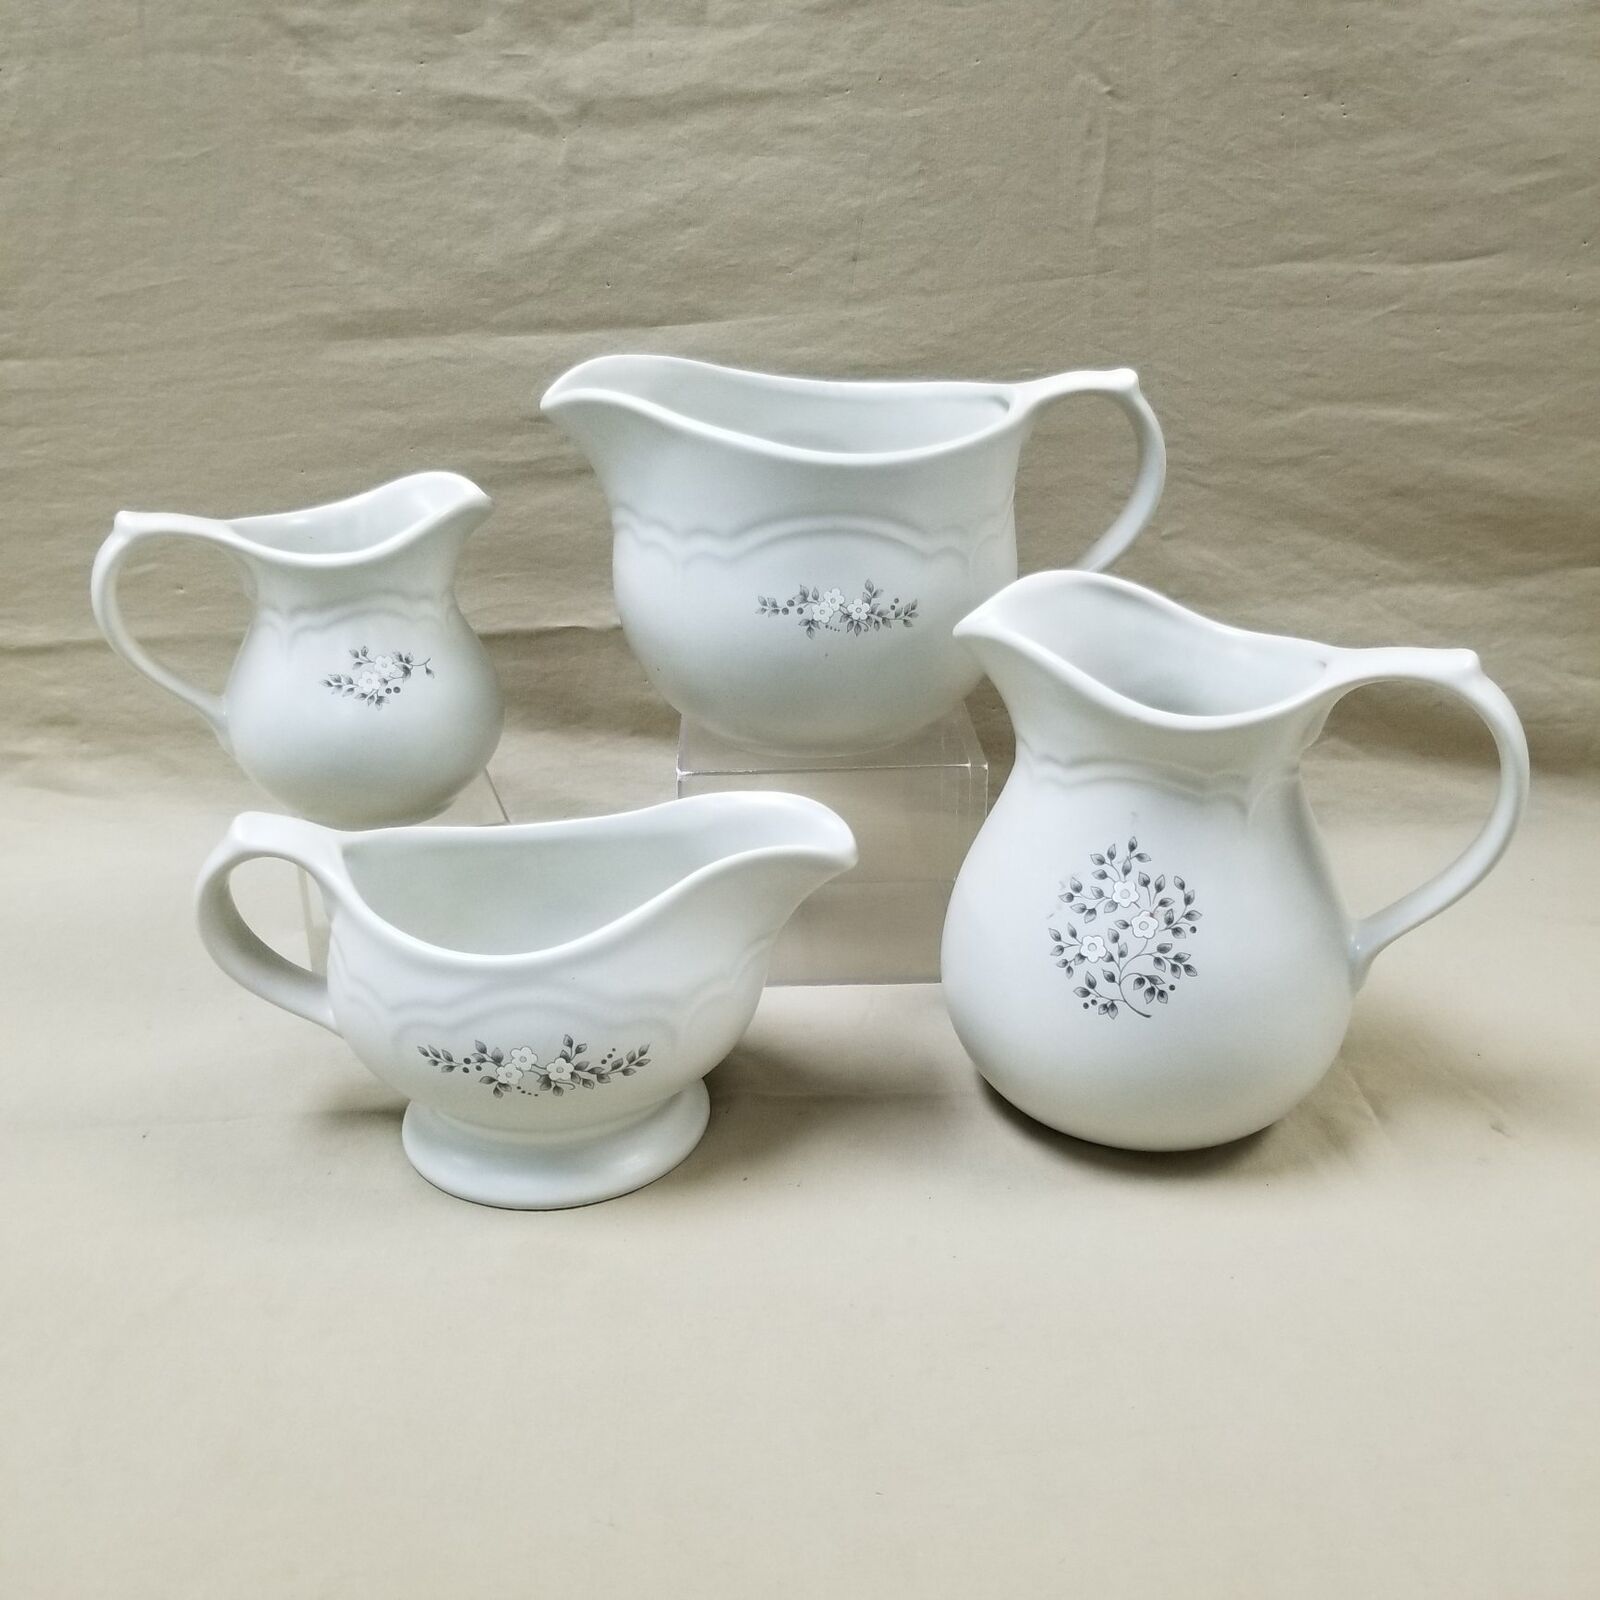 4pc Lot of Pfaltzgraff Heirloom Floral Serving Pieces - Gravy Boat, Pitchers+